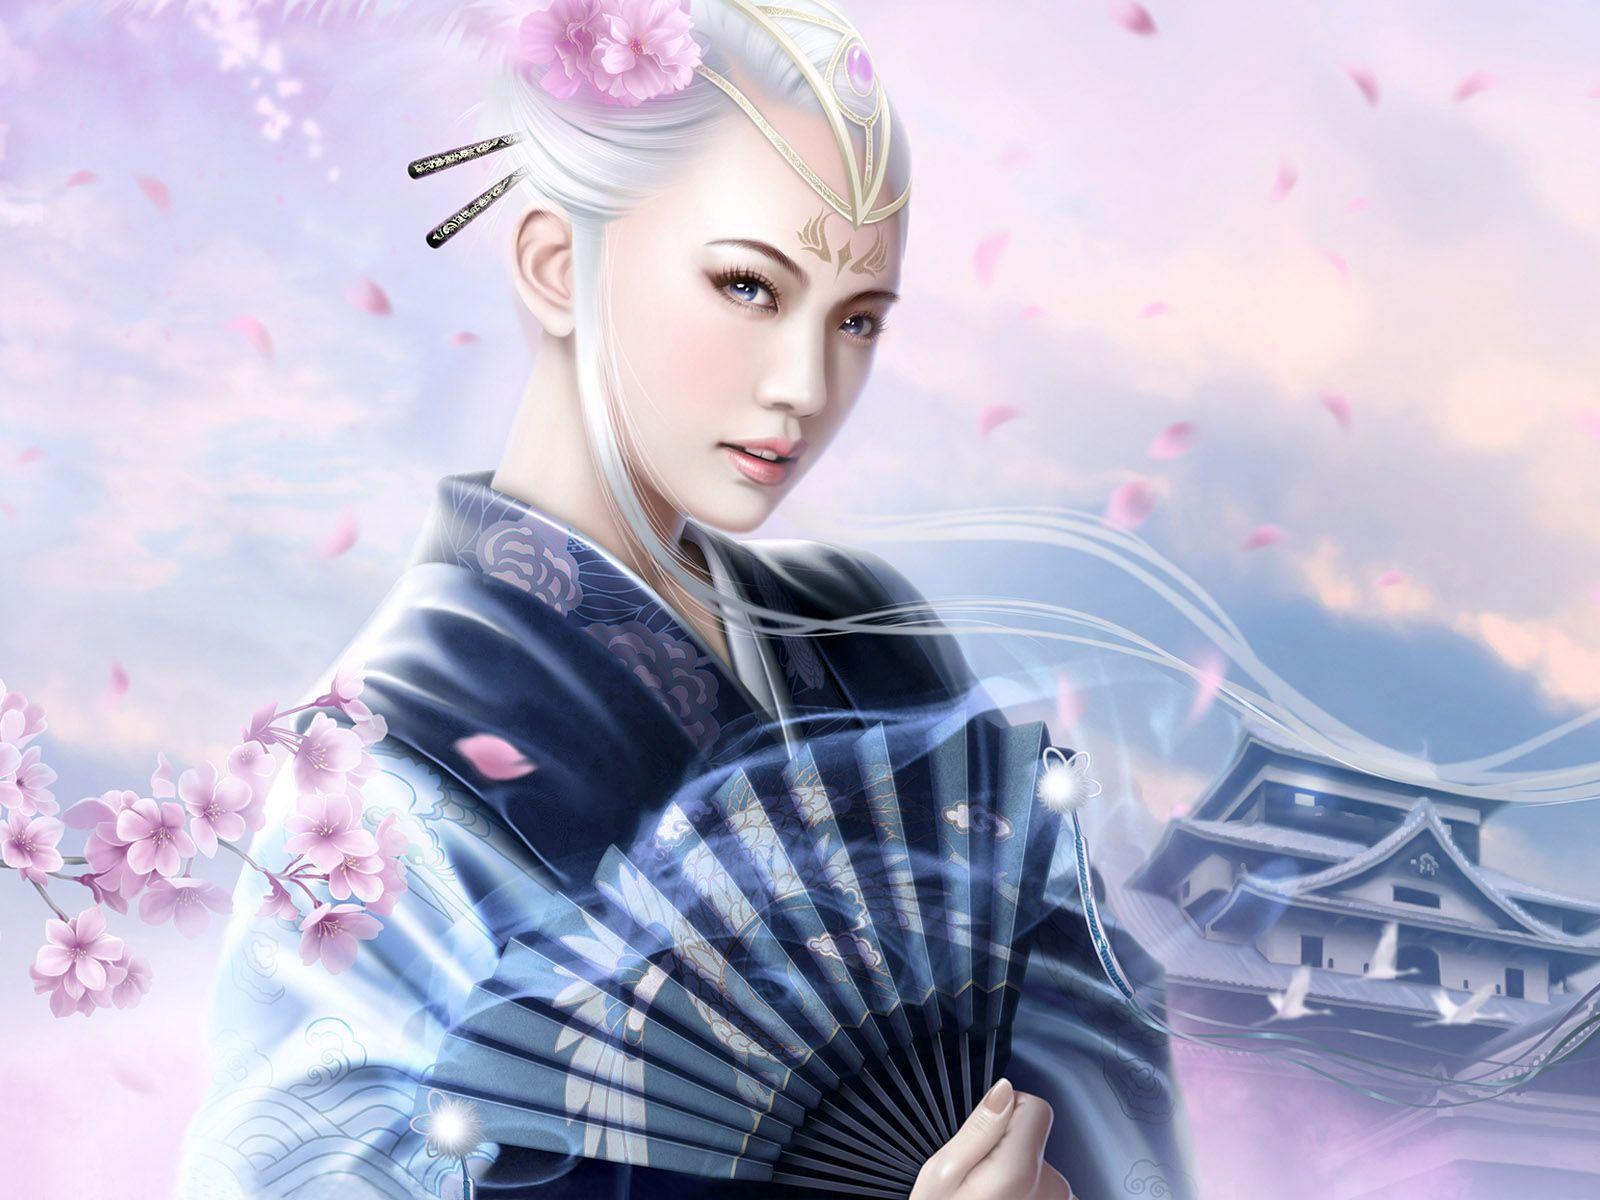 Geisha wallpaper and image, picture, photo